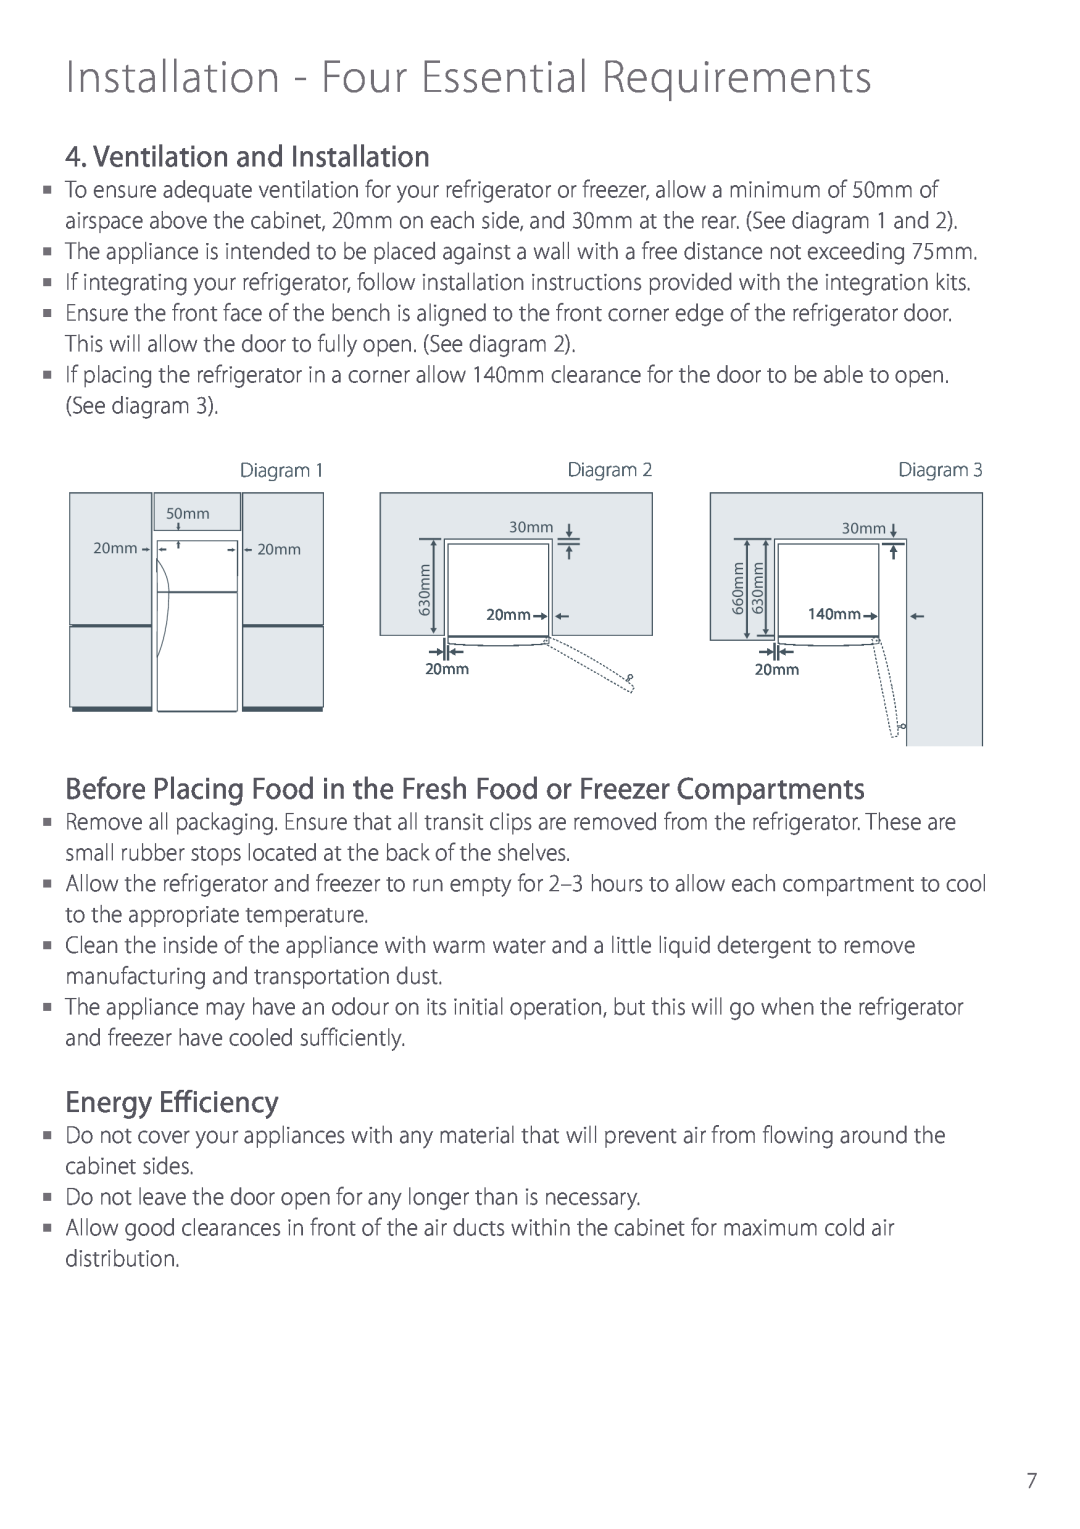 Fisher & Paykel E440T Ventilation and Installation, Energy Efficiency, Installation - Four Essential Requirements, Diagram 